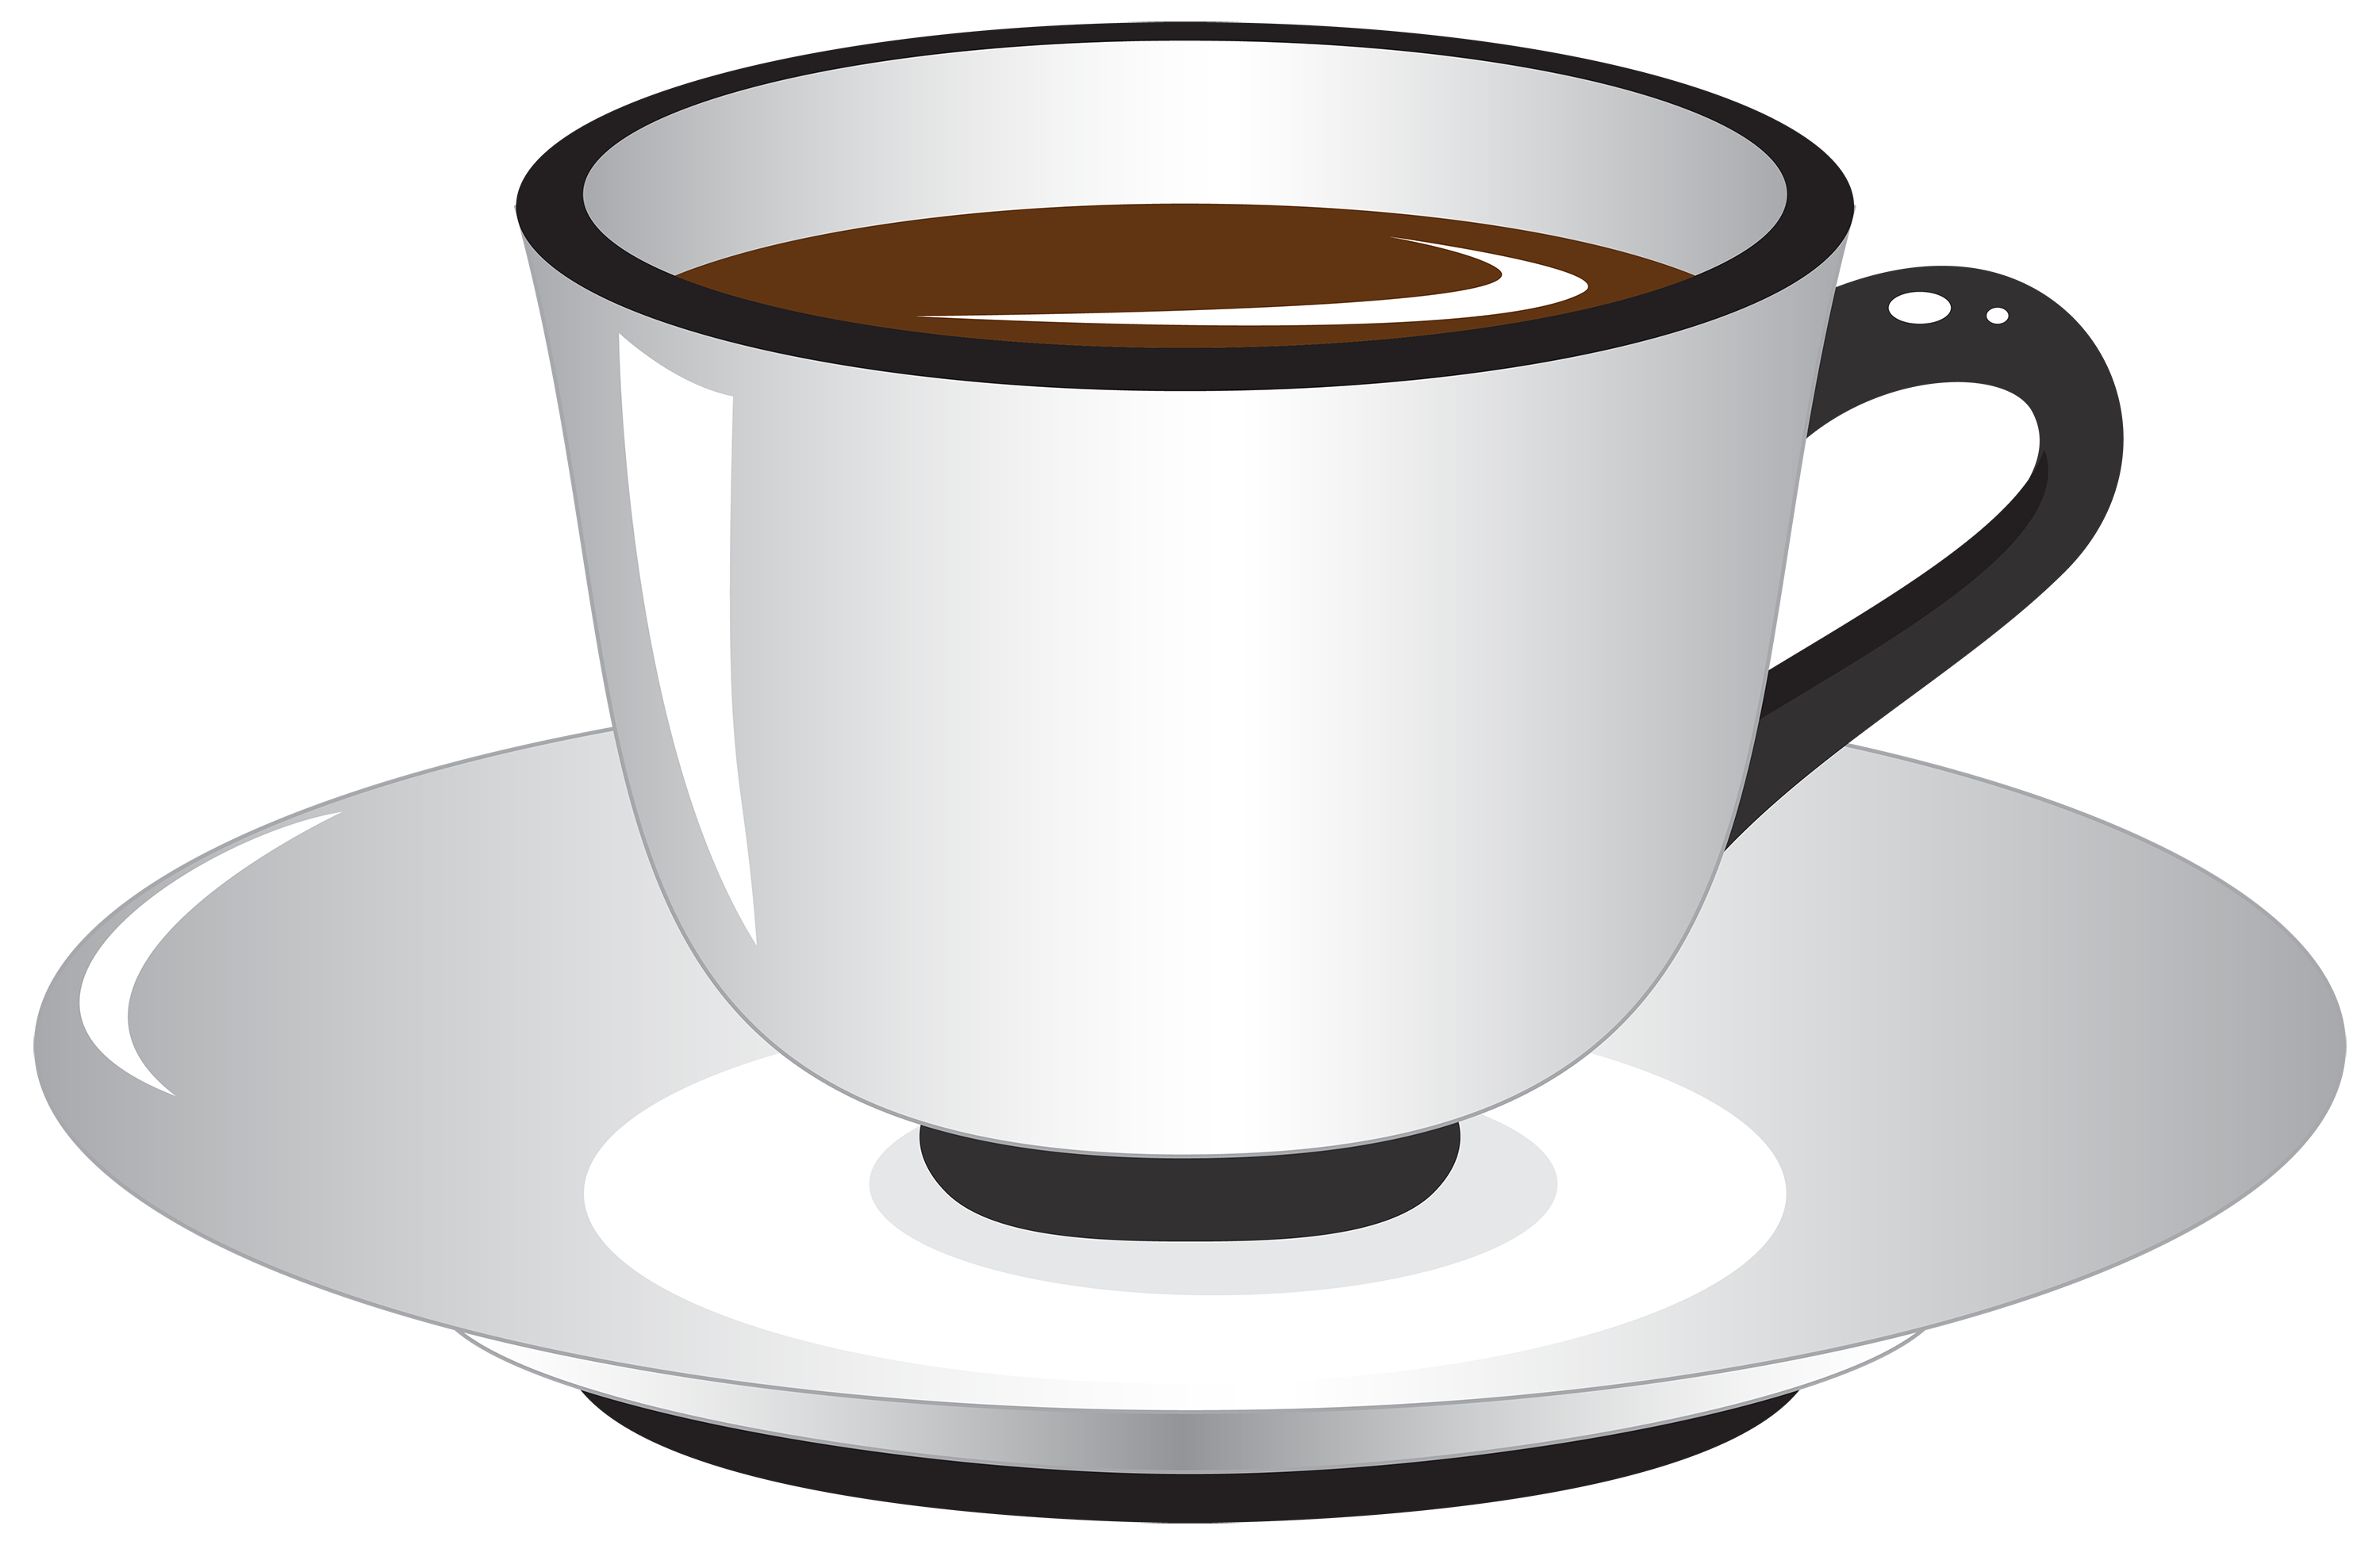 Free Coffee Cup Png Images, Download Free Coffee Cup Png Images png ...